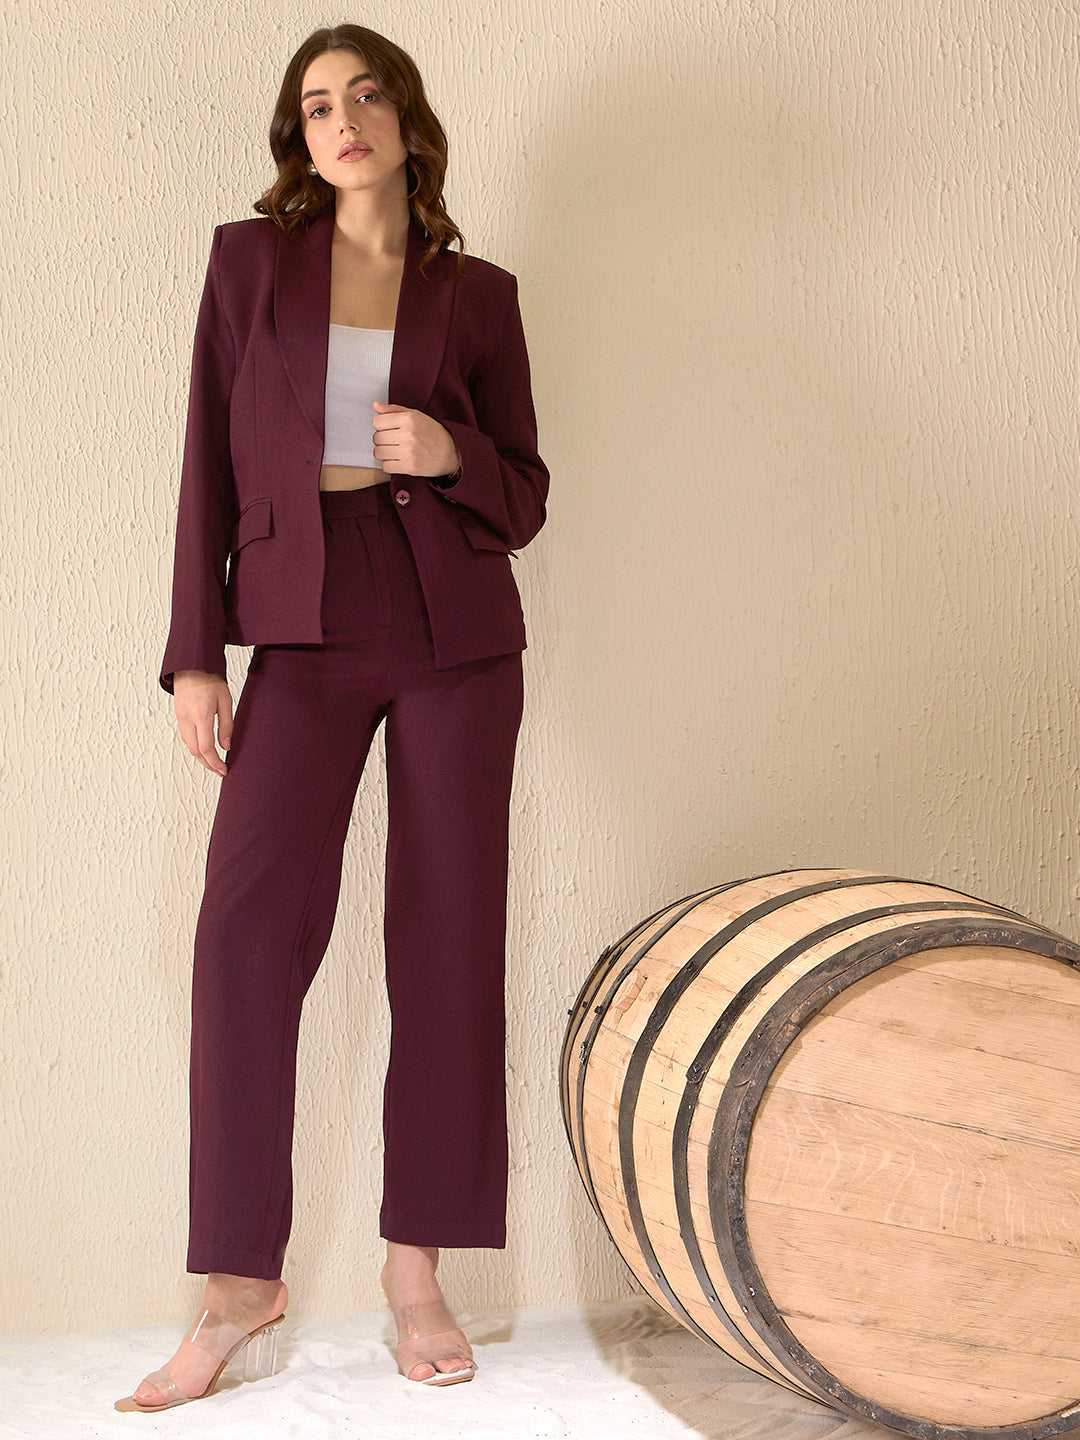 DENNISON Women Solid Slim Fit Single Breasted 2-Piece Formal Suit